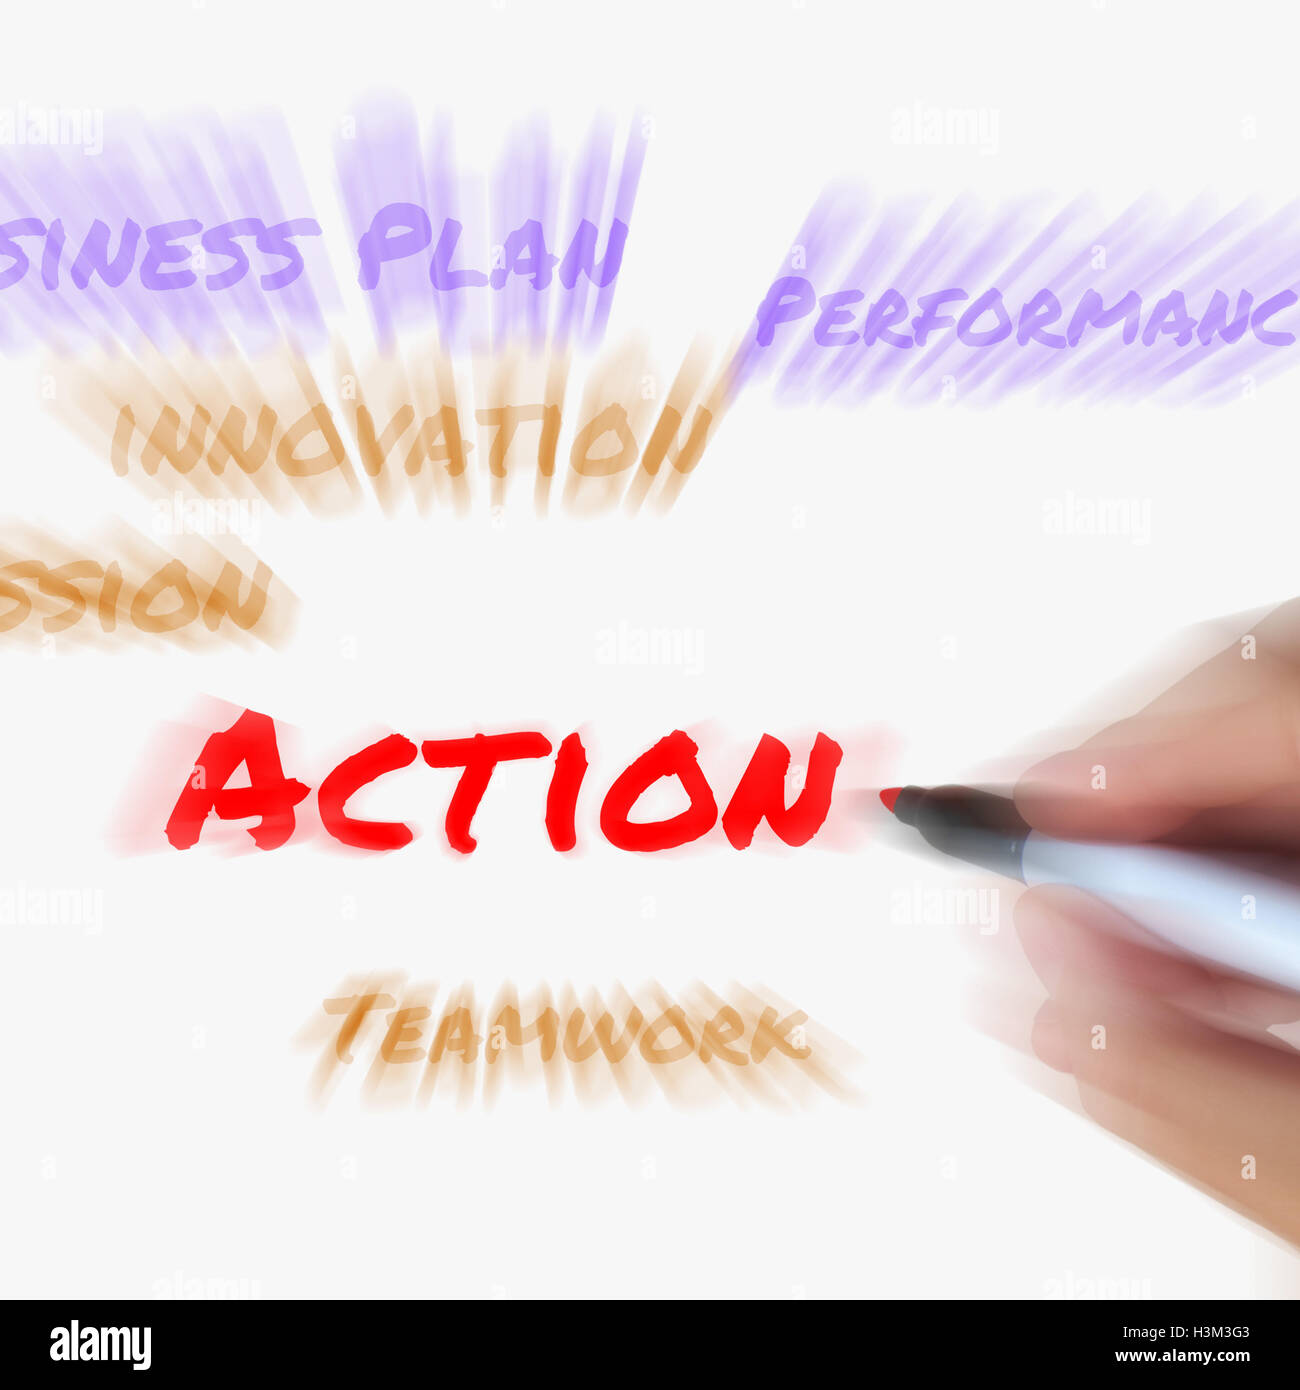 Action Words on Whiteboard Displays Activity Mission and Perform Stock Photo